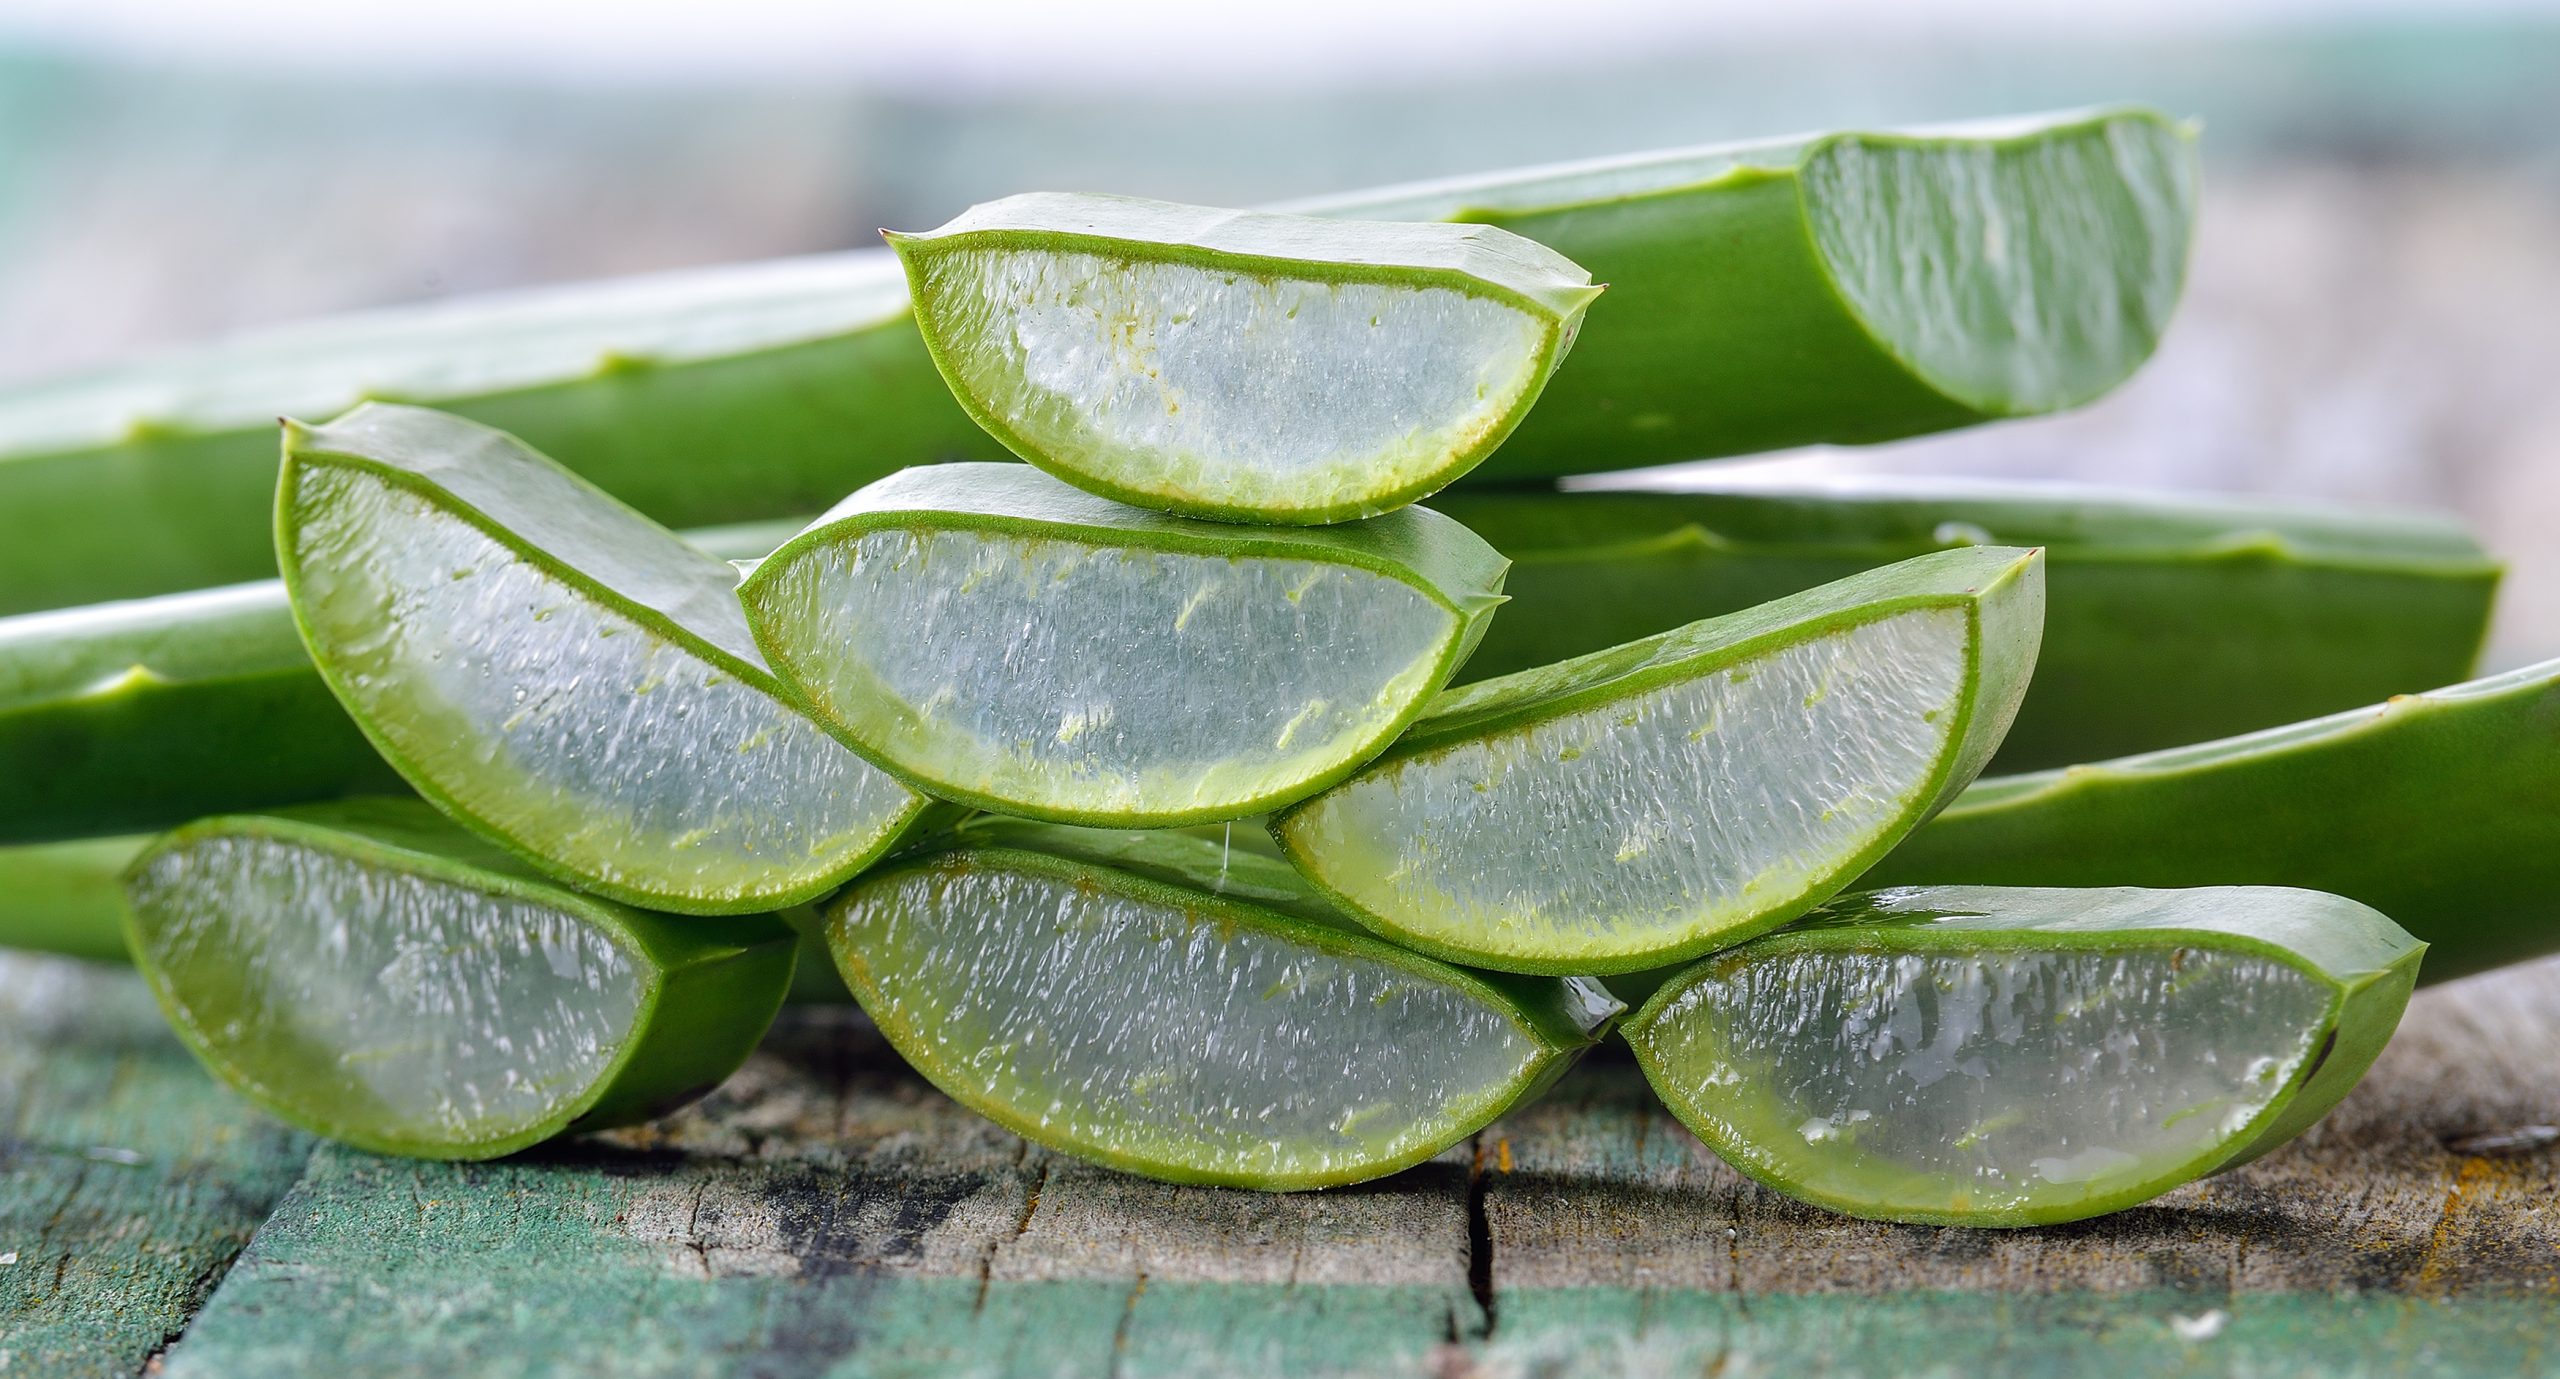 There are plenty of products in the market boasting their Aloe